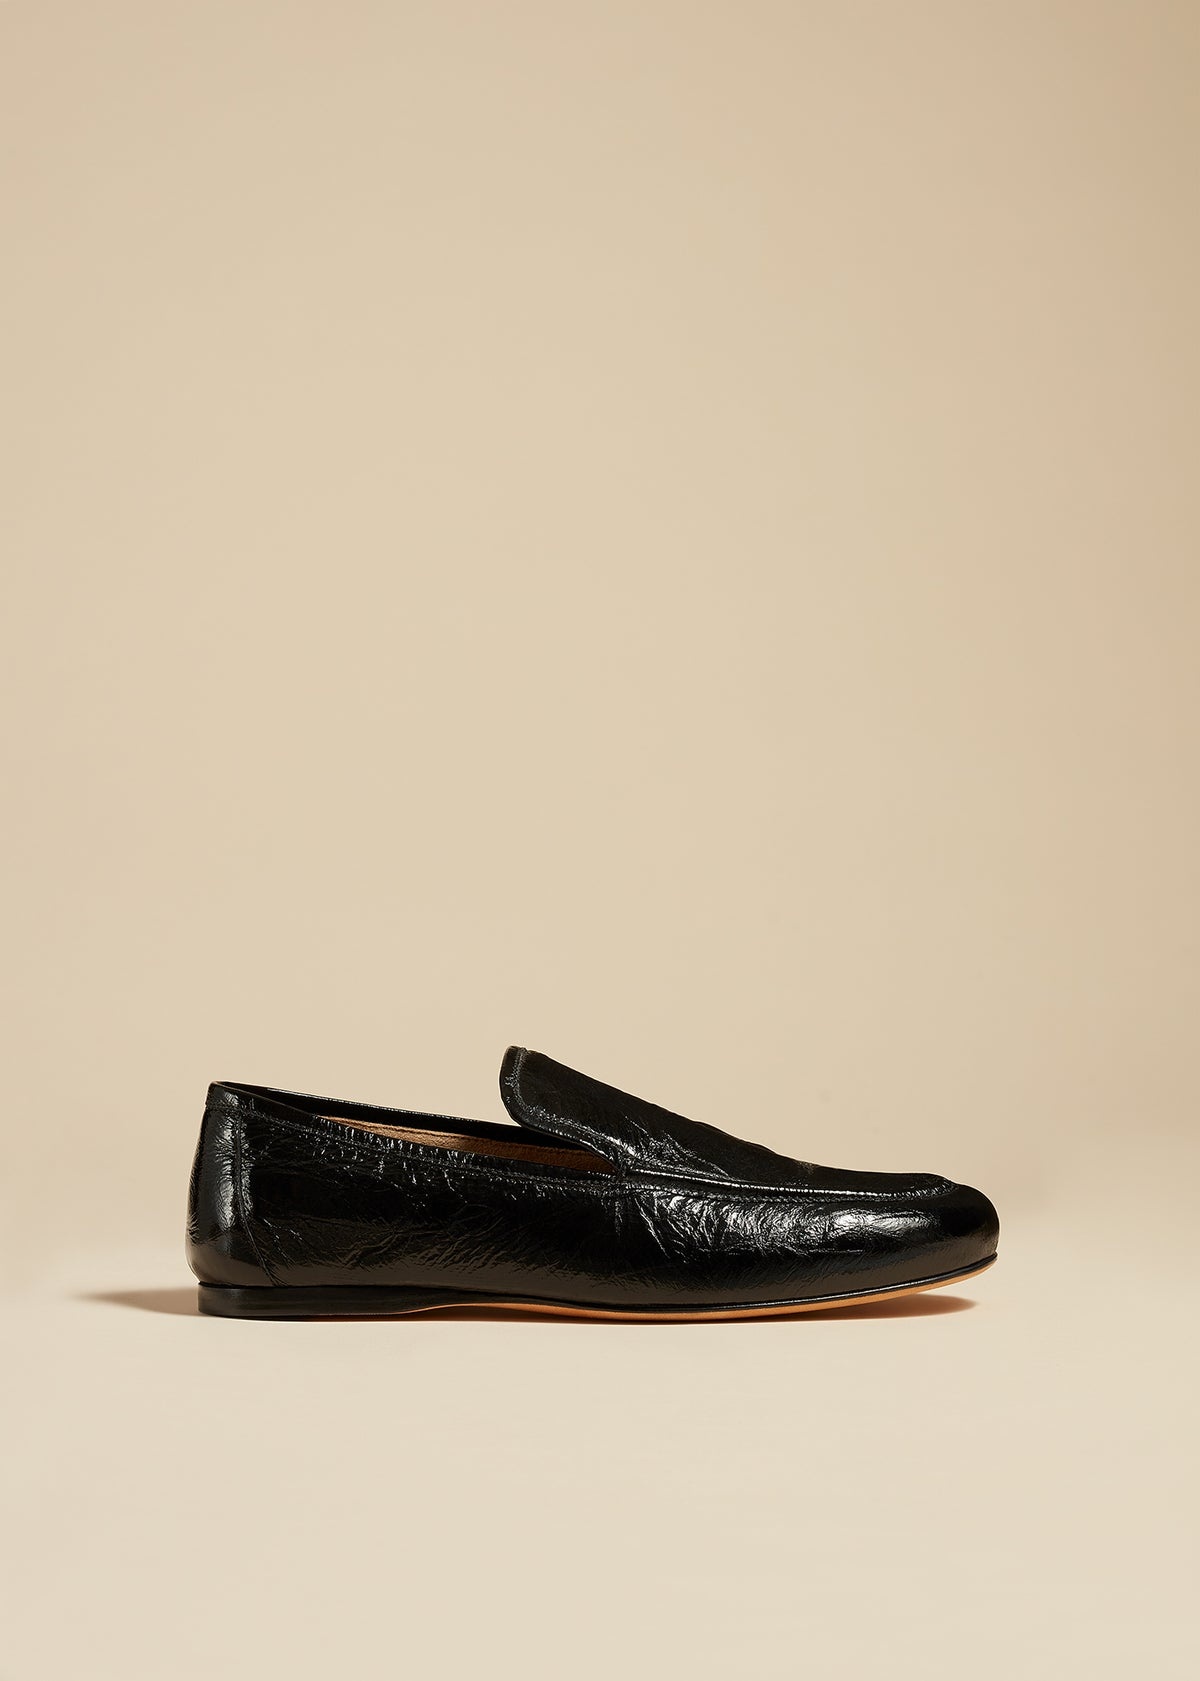 The Alessia Loafer in Black Crinkled Leather - 2